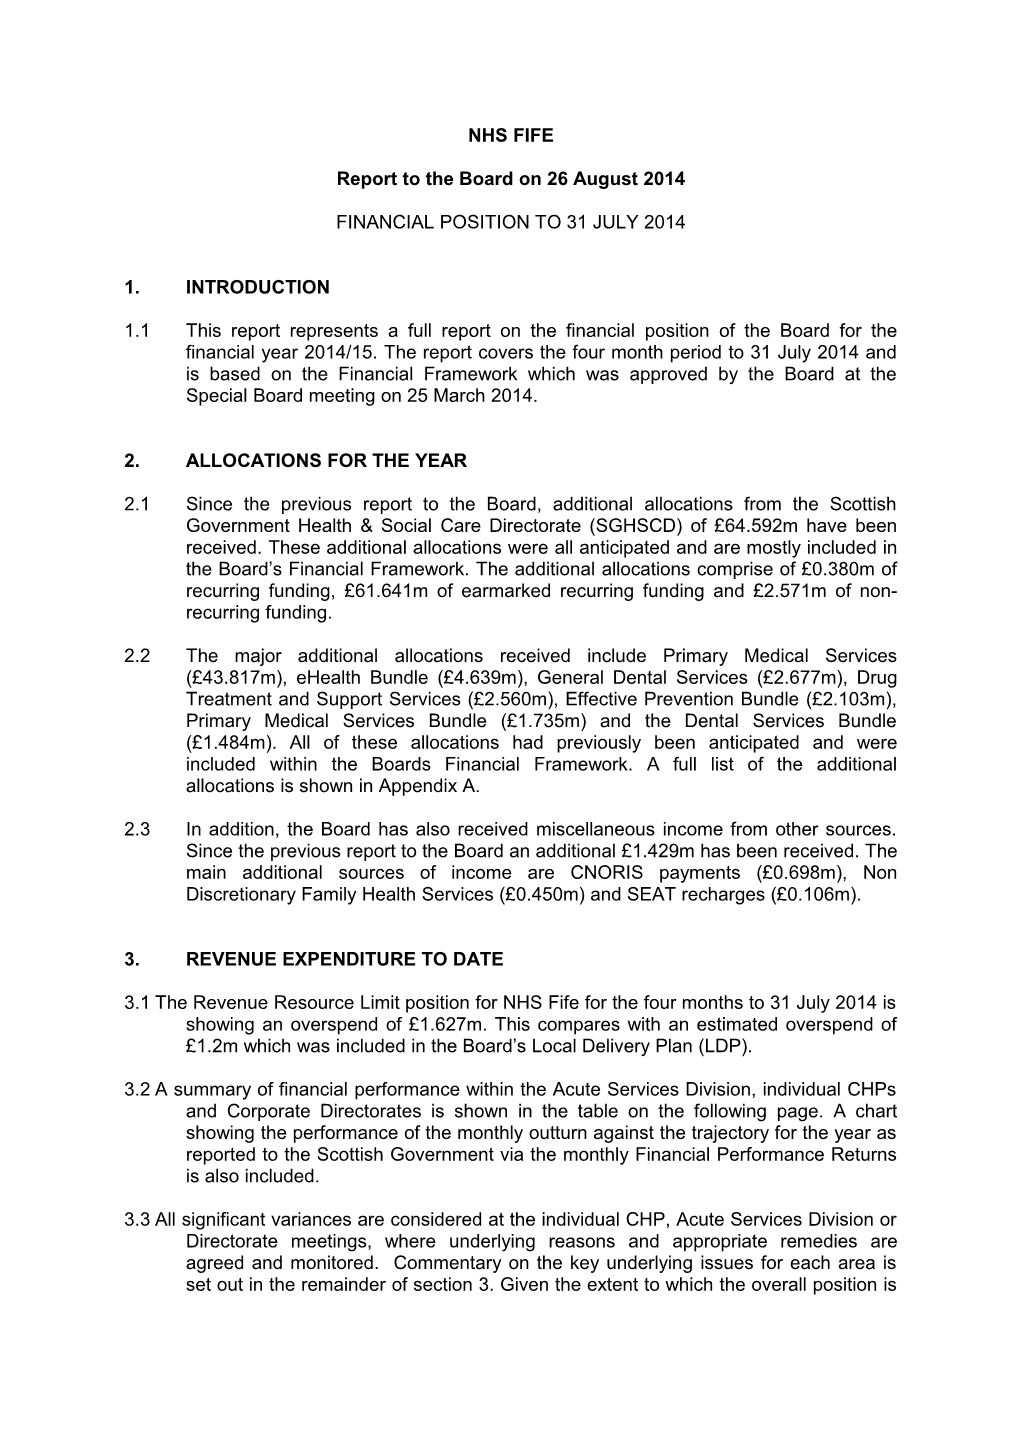 Report to the Board on 26 August 2014